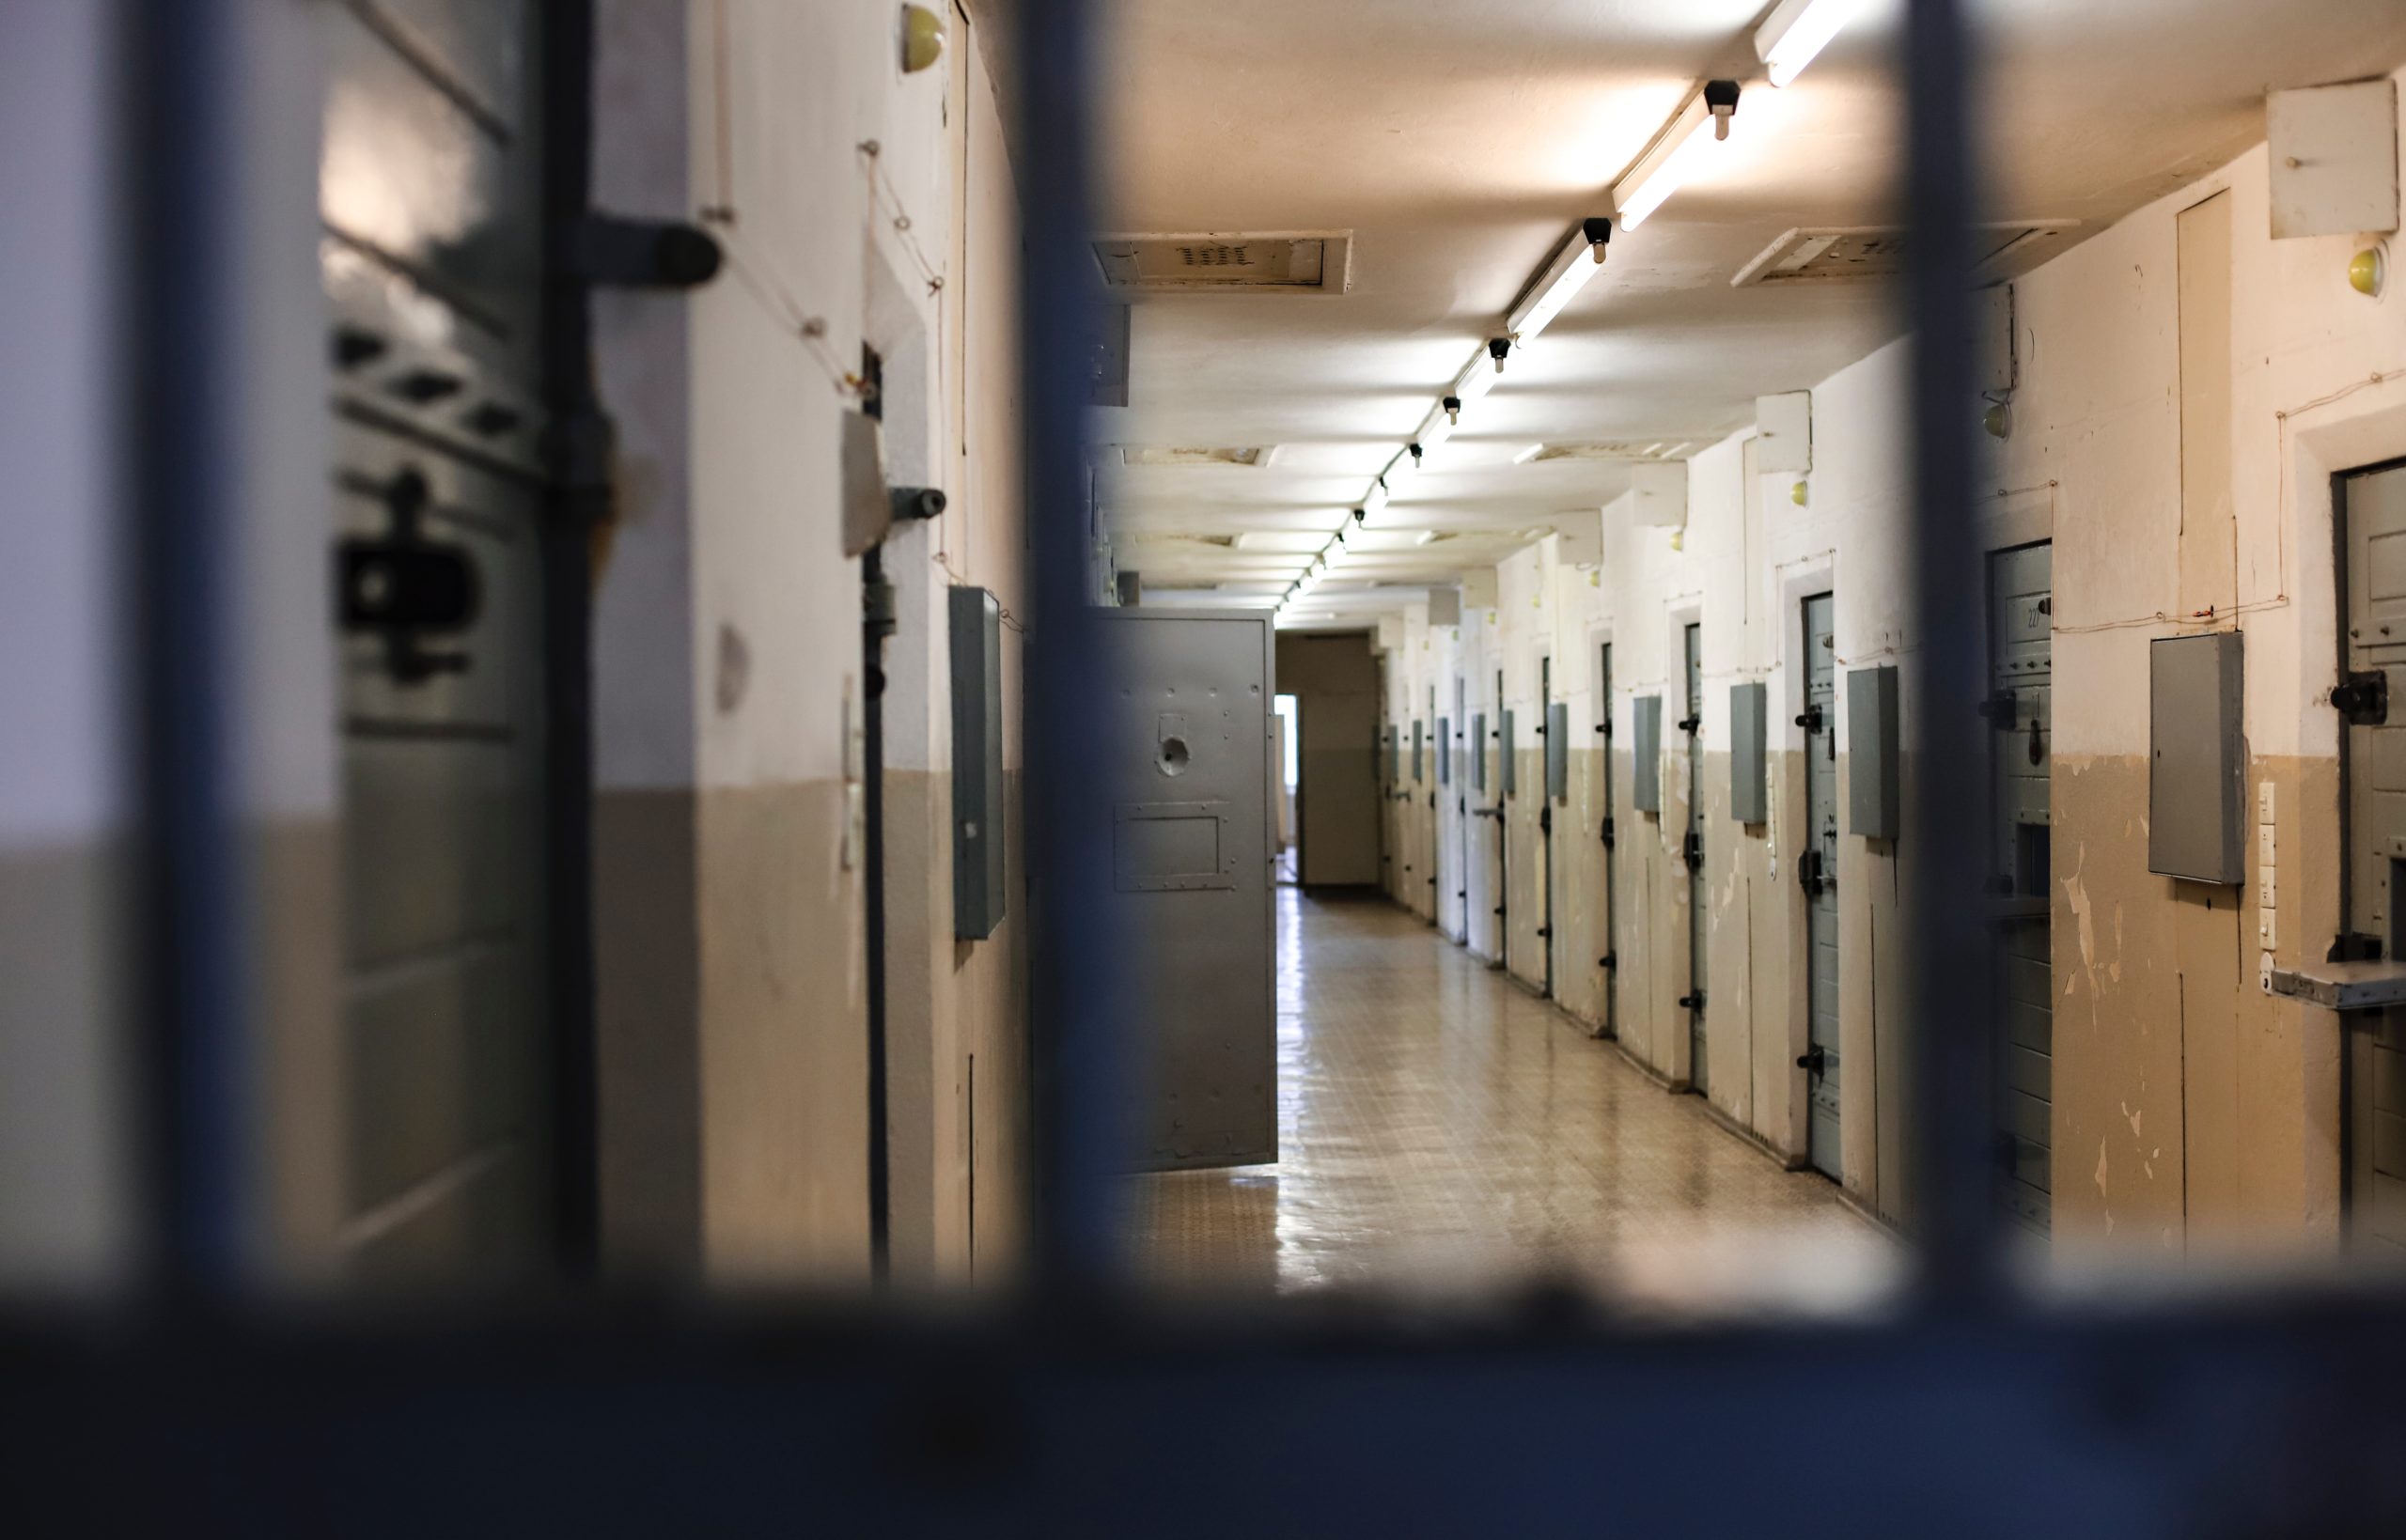 Photo of corridor in a prison with prison cells